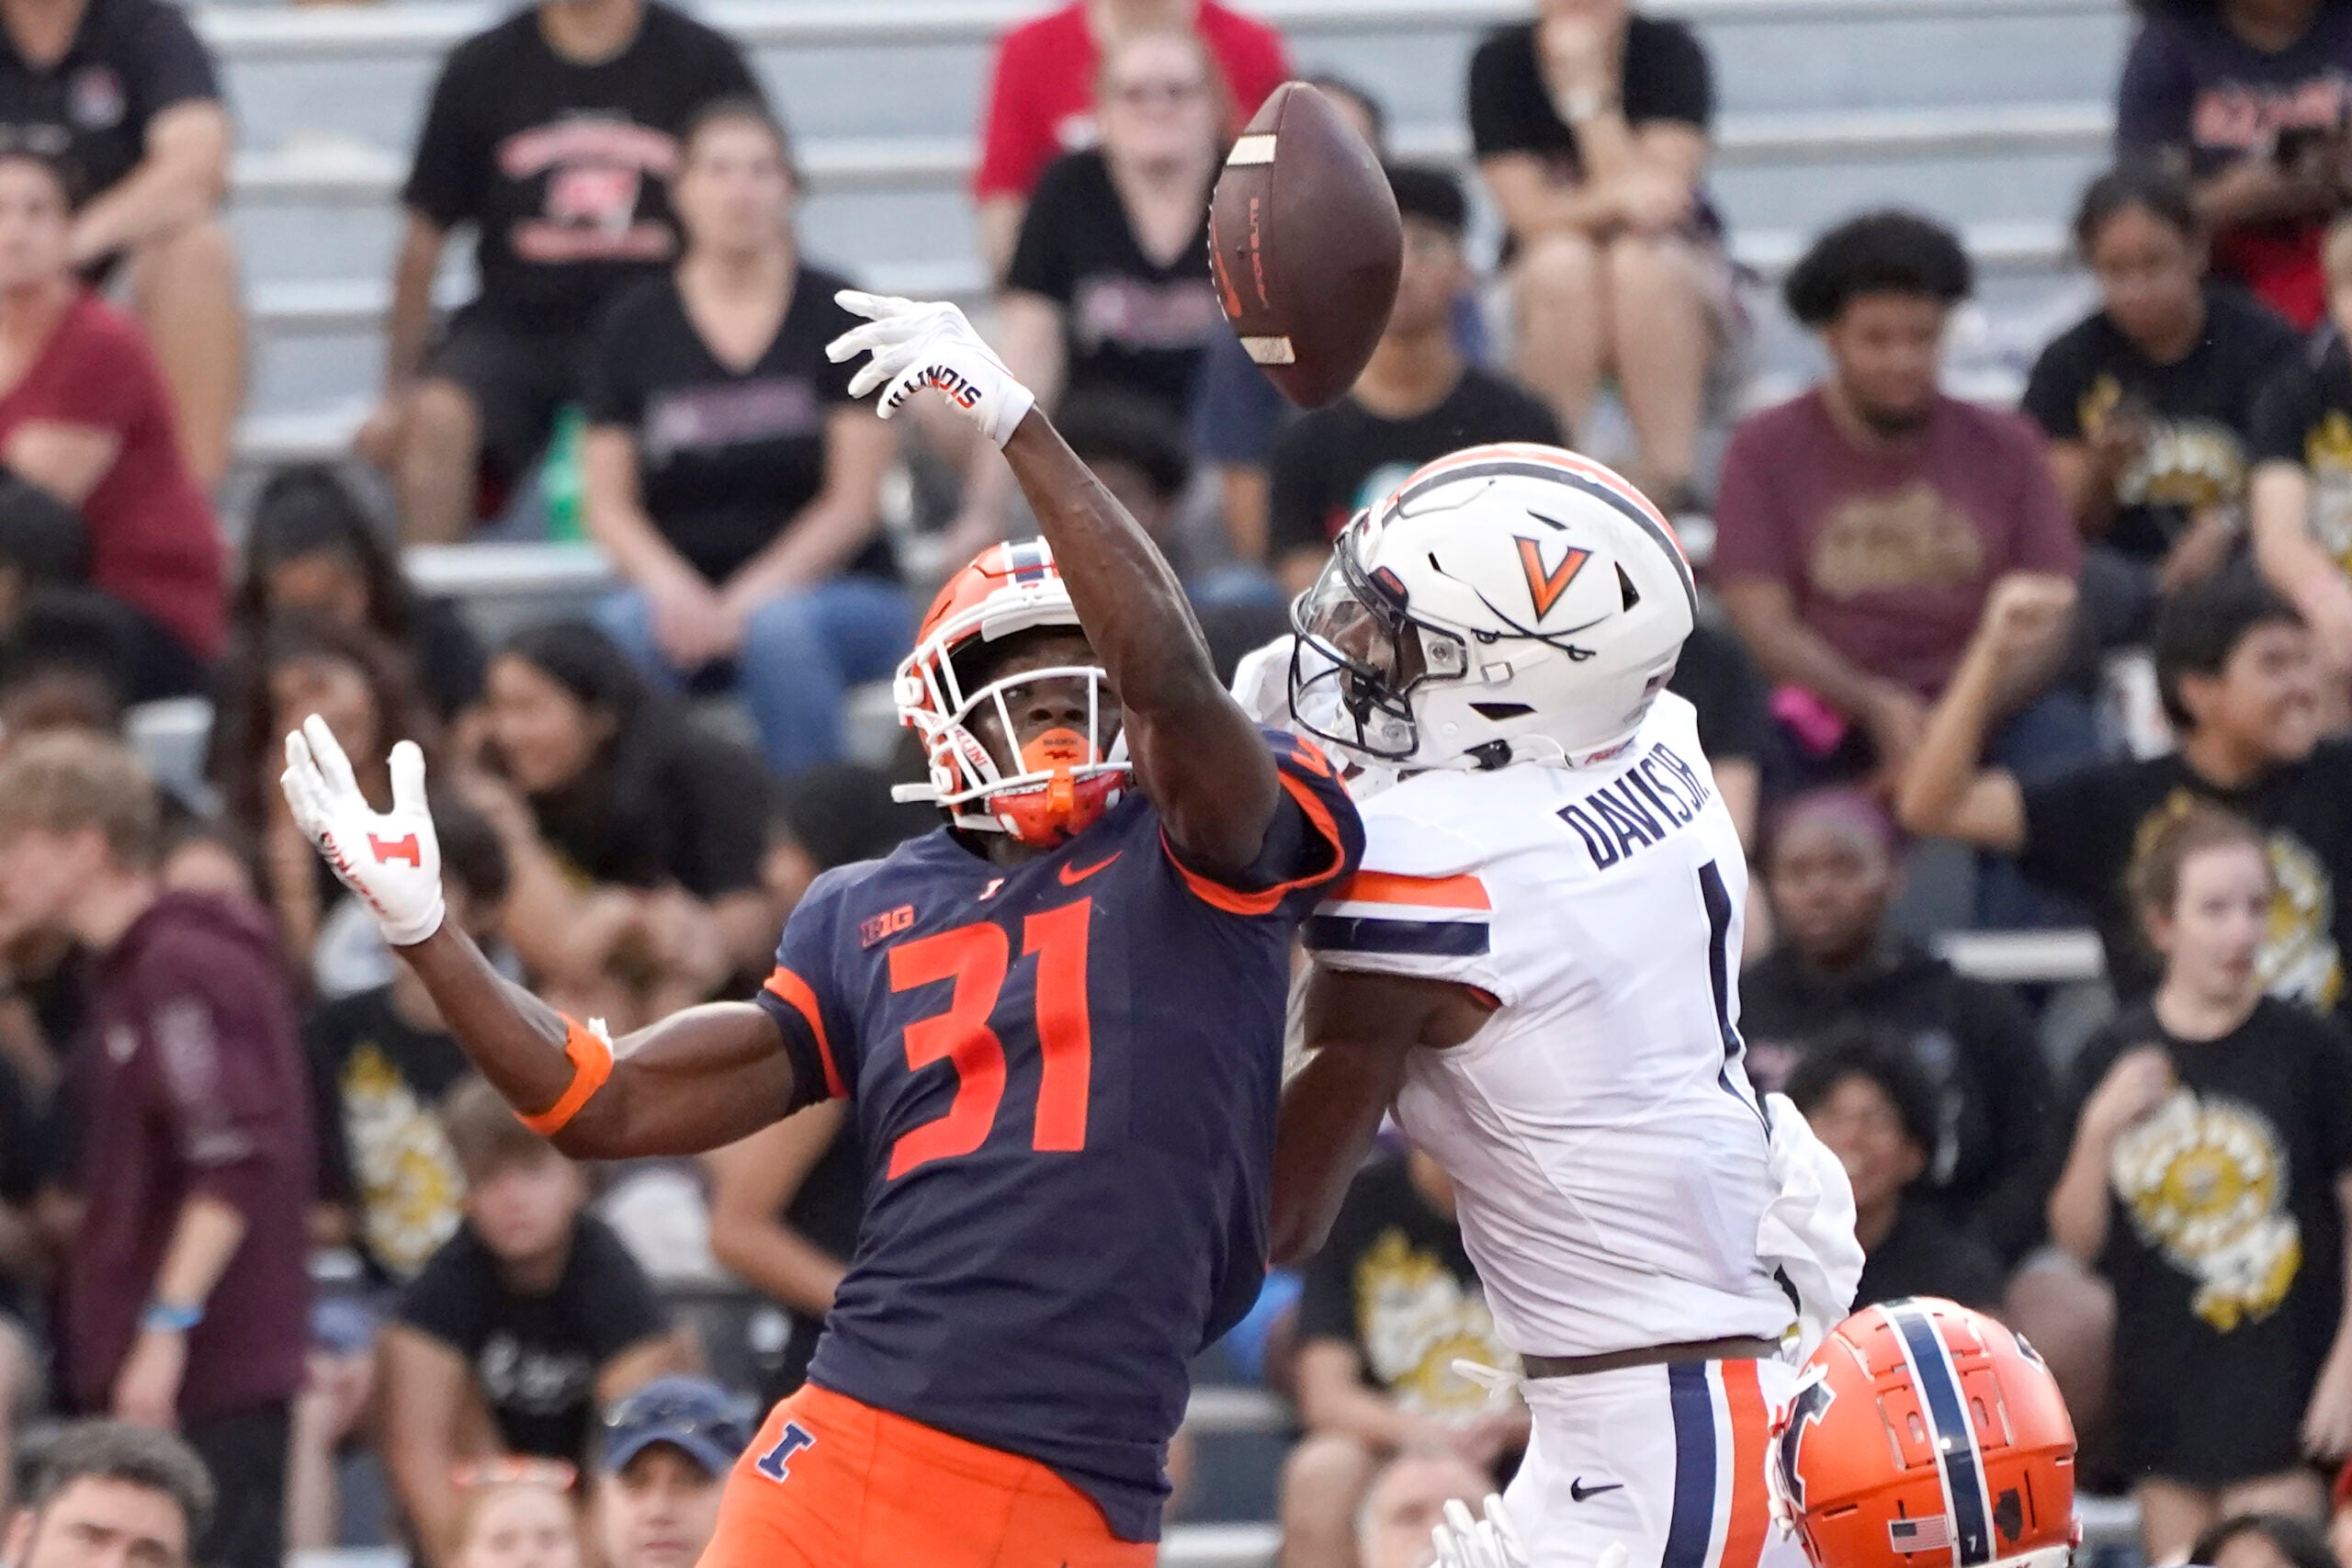 Potential Patriots draft pick Devon Witherspoon playing for Illinois.